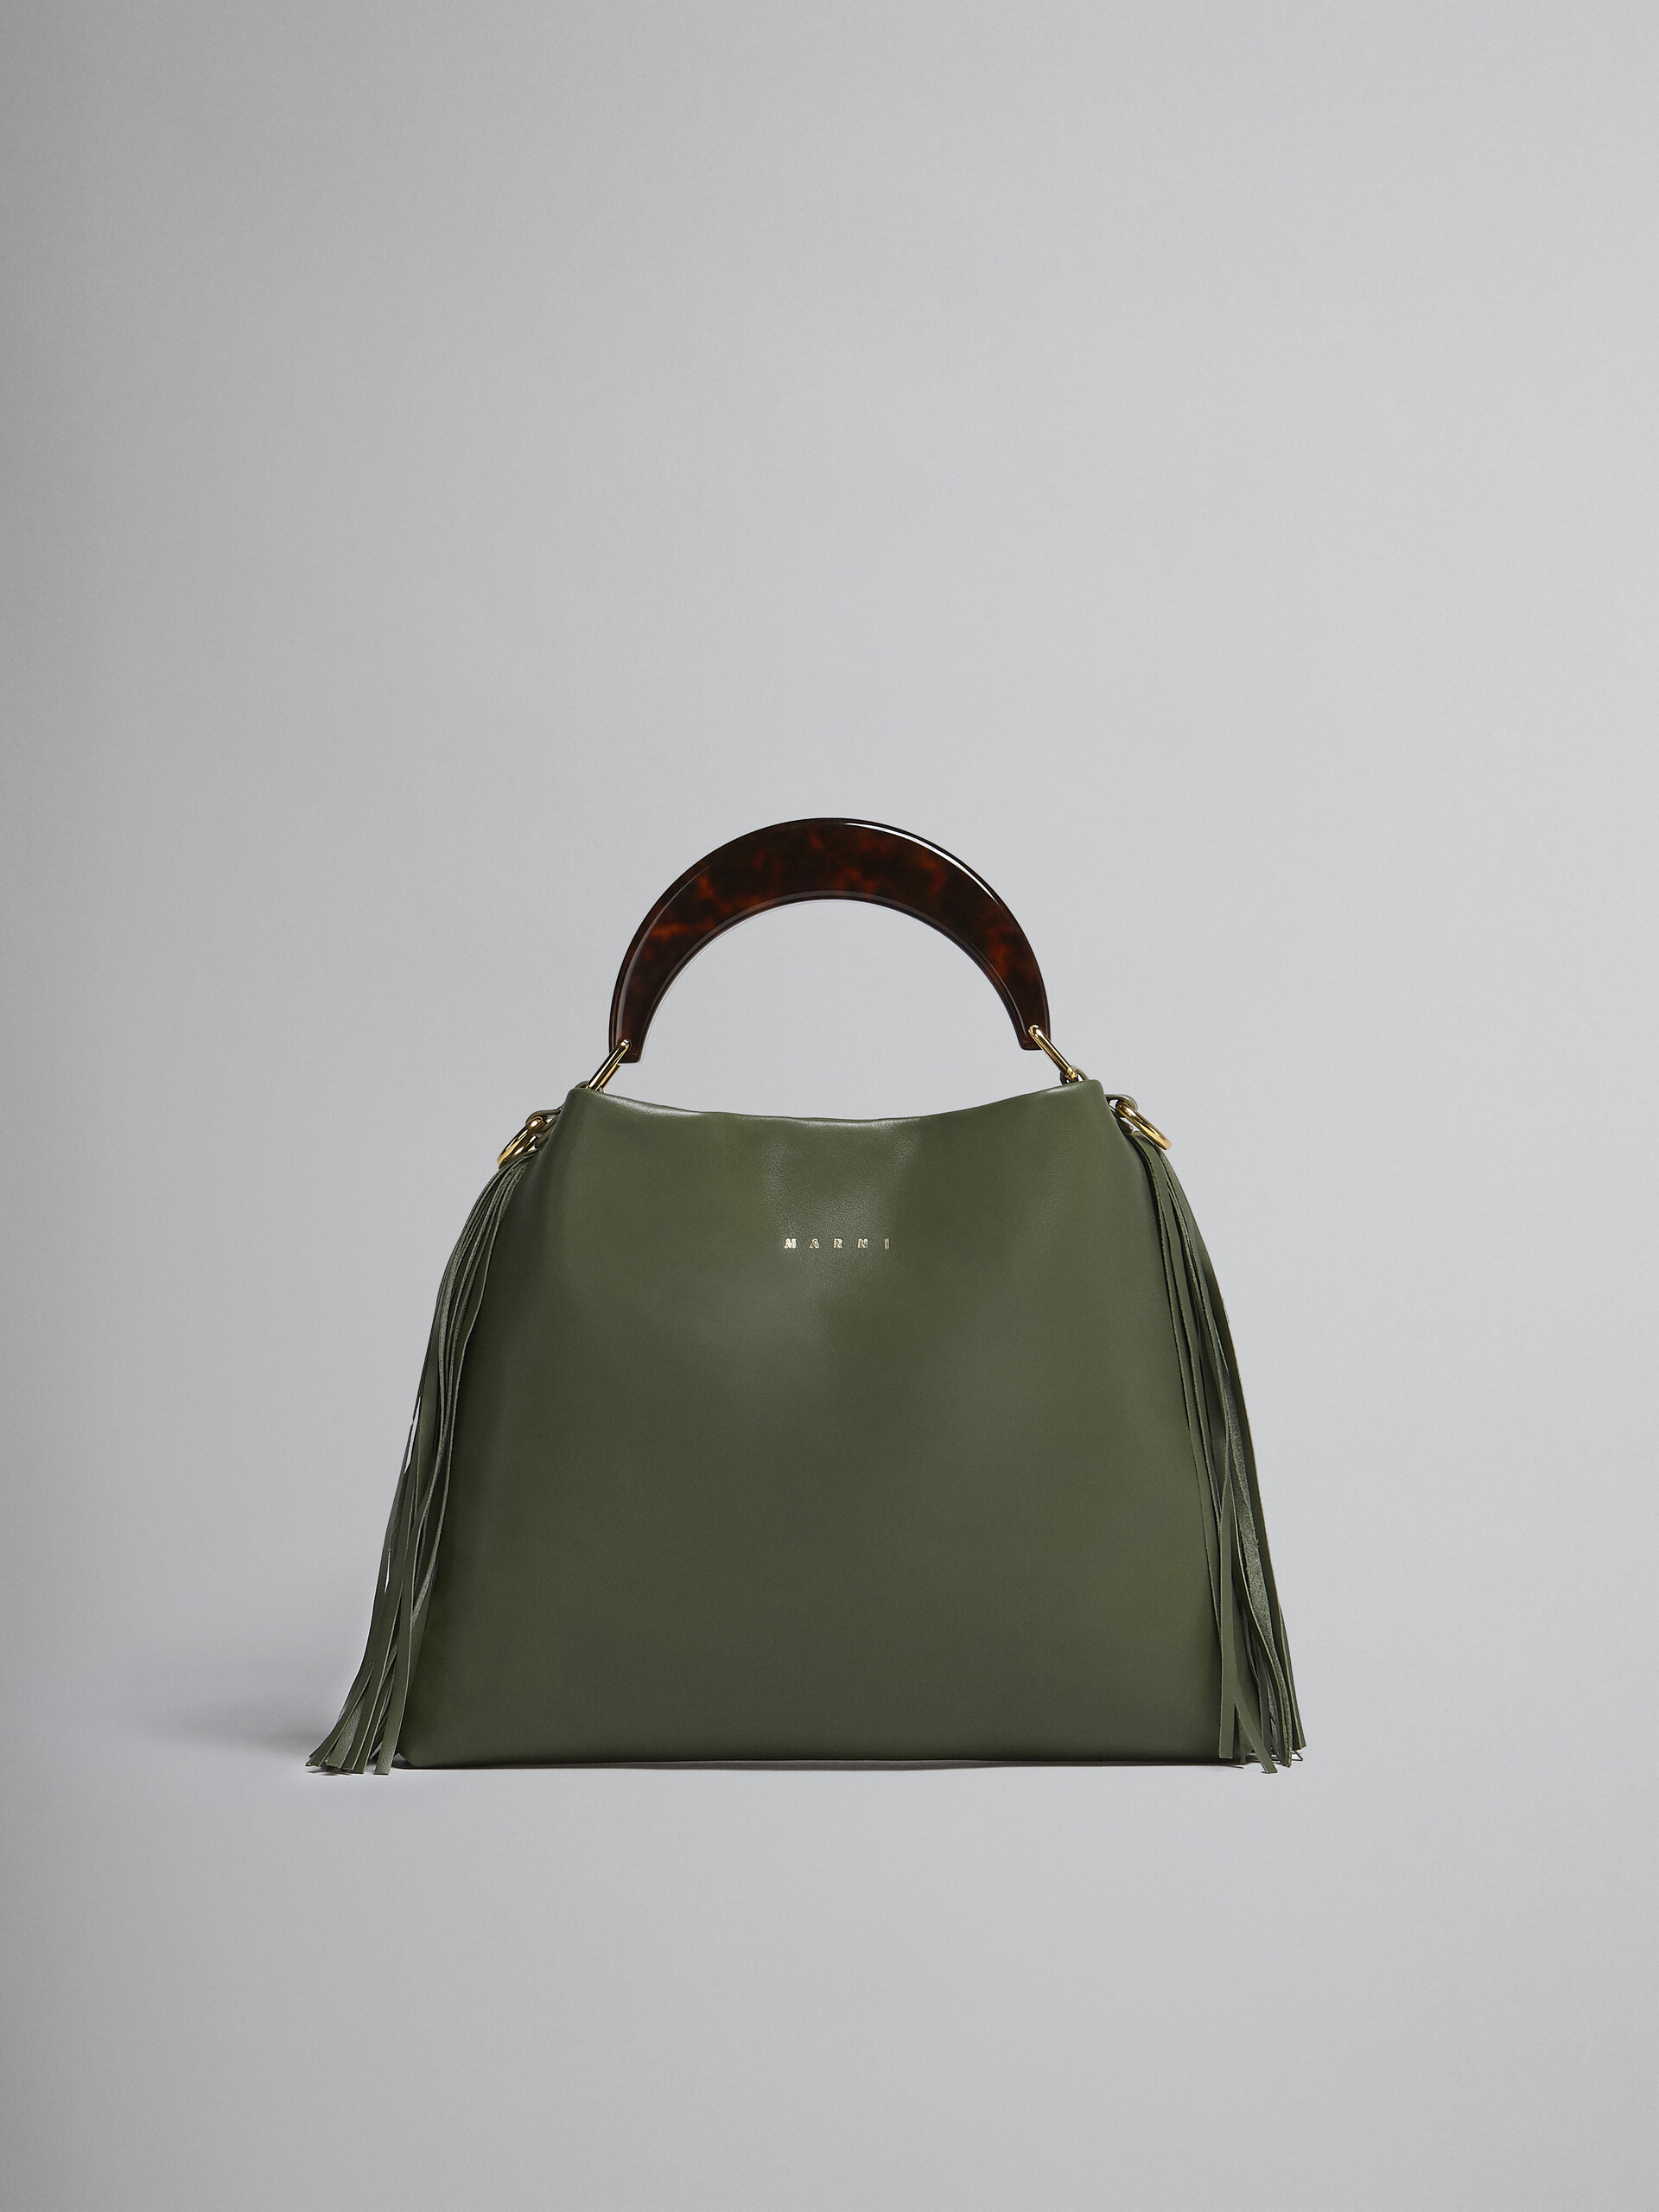 Venice Small Bag in green leather with fringes - Shoulder Bag - Image 1